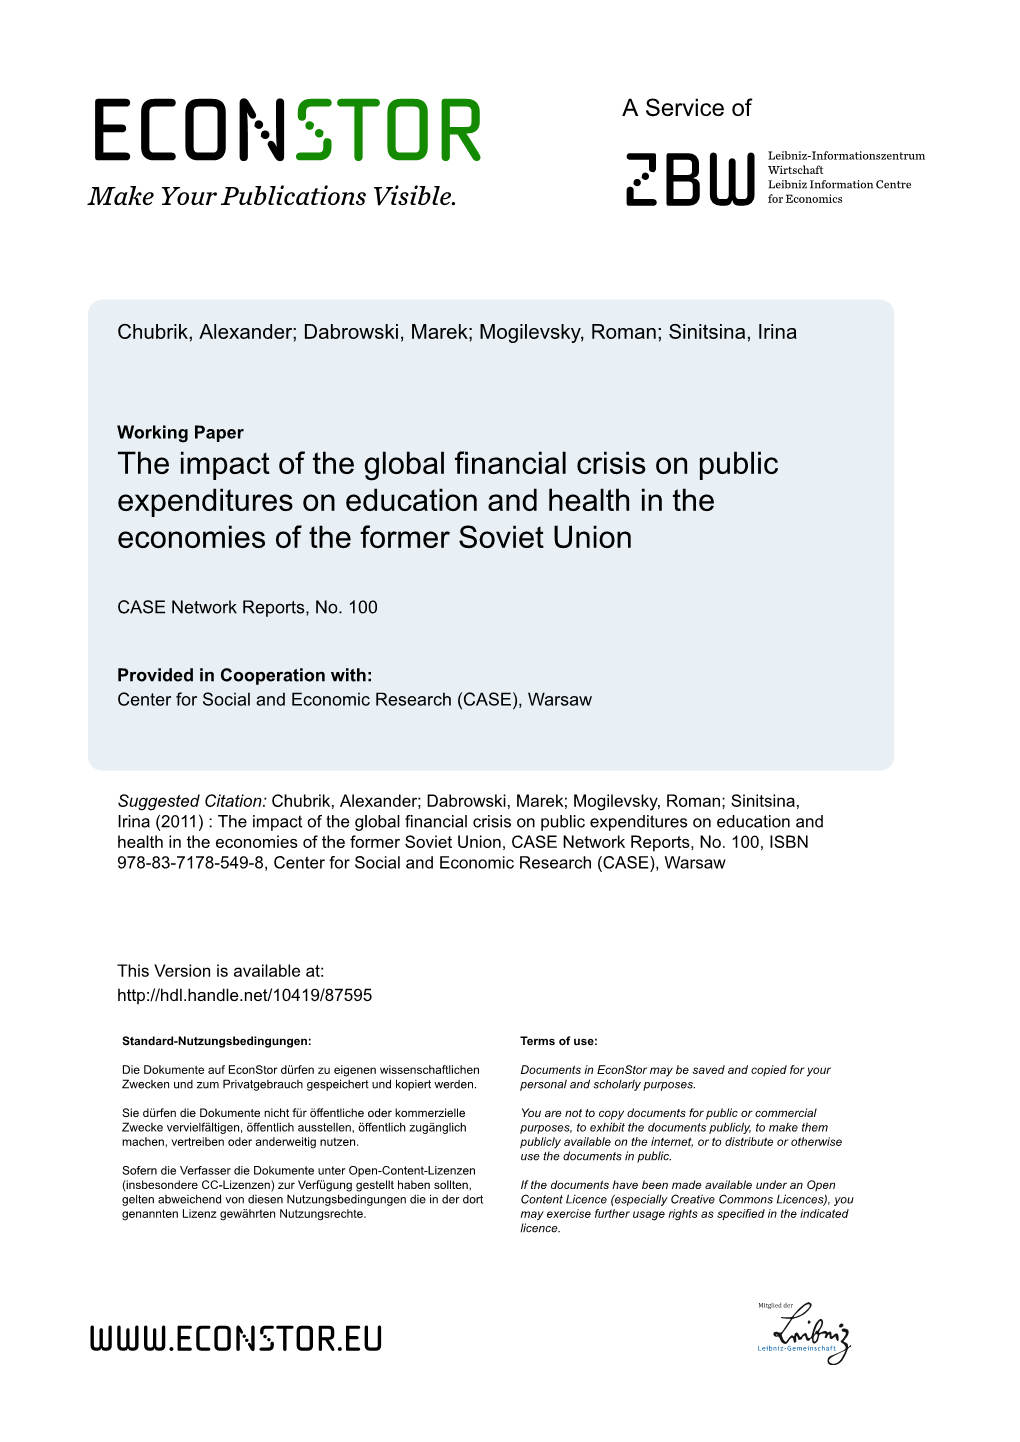 The Impact of the Global Financial Crisis on Public Expenditures on Education and Health in the Economies of the Former Soviet Union